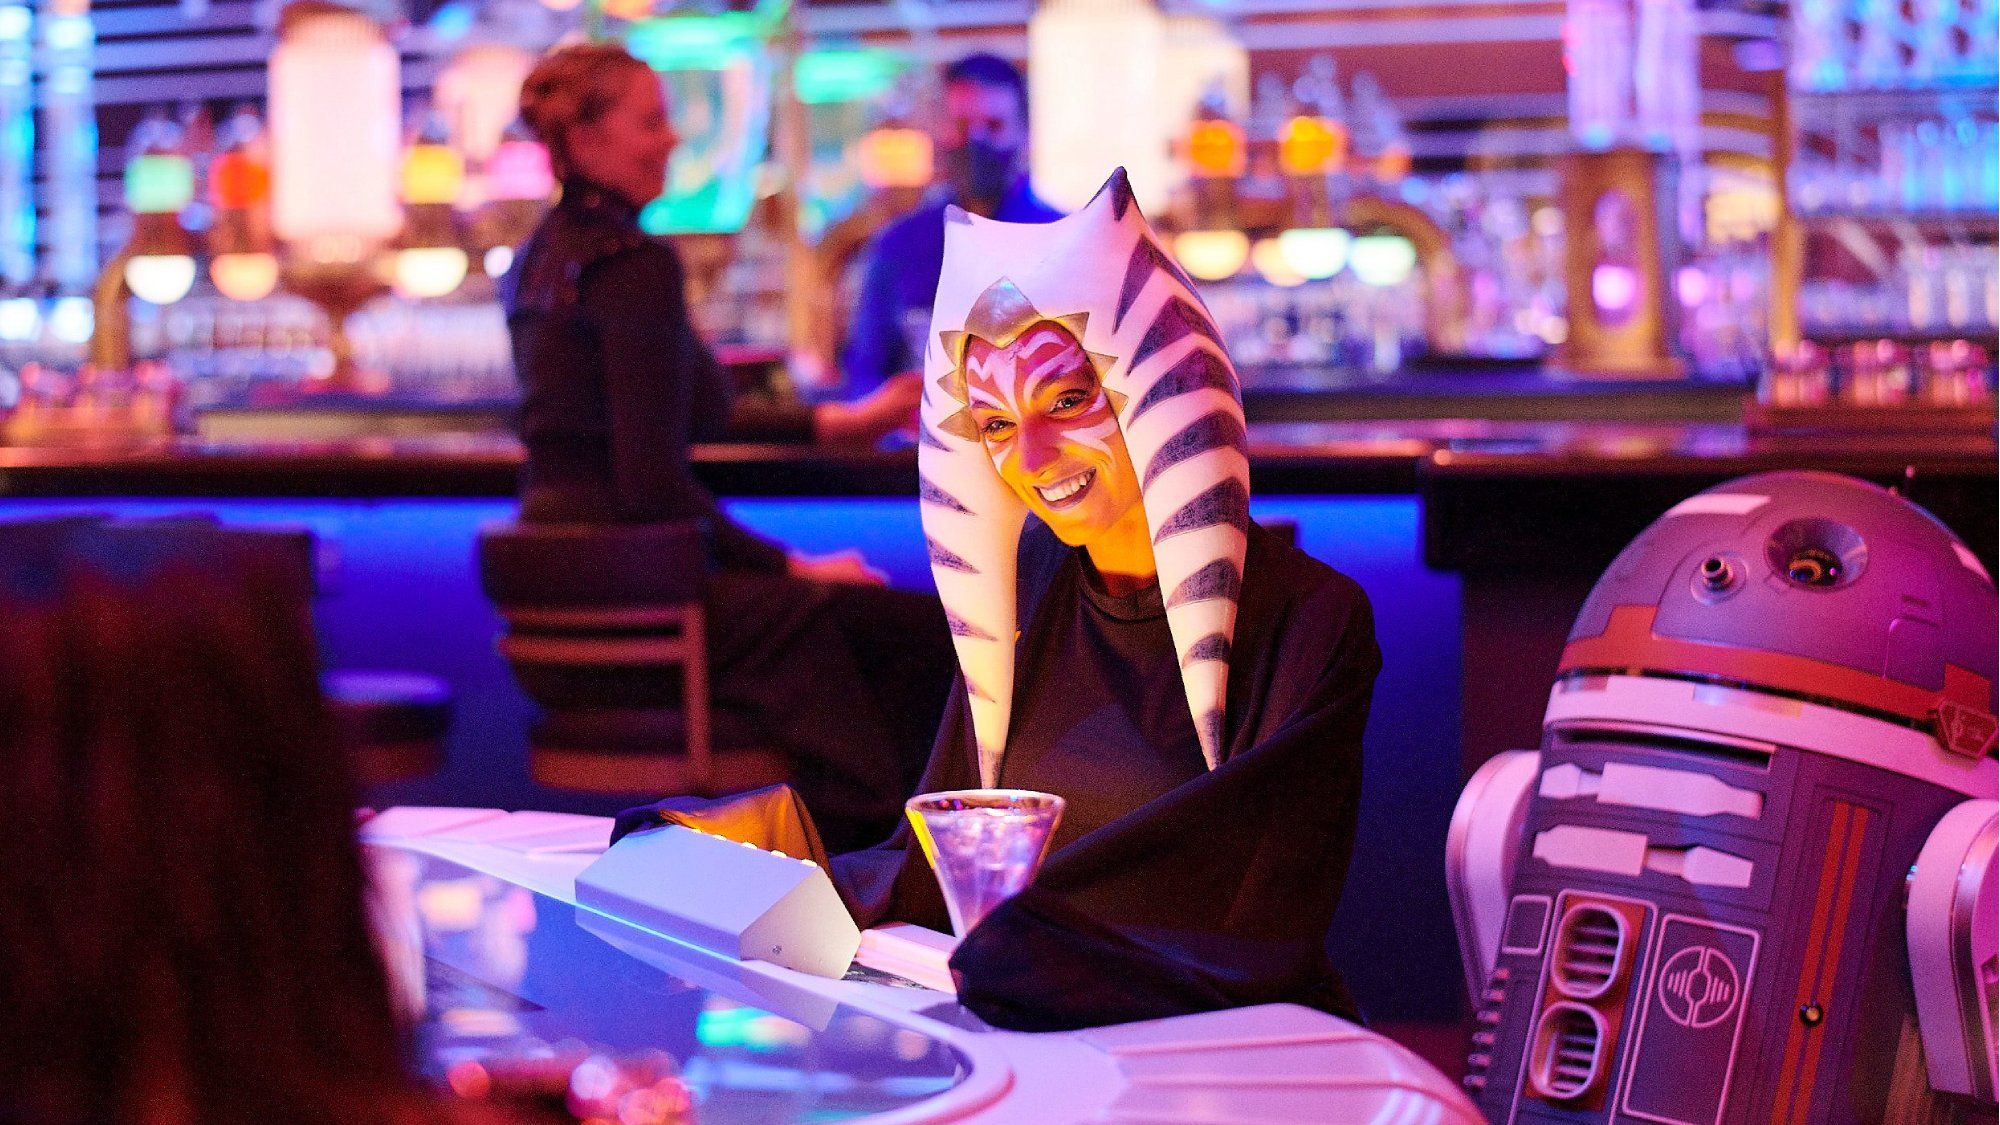 Guests are fully immersed in the action on Star Wars: Galactic Starcruiser, including dressing as characters.